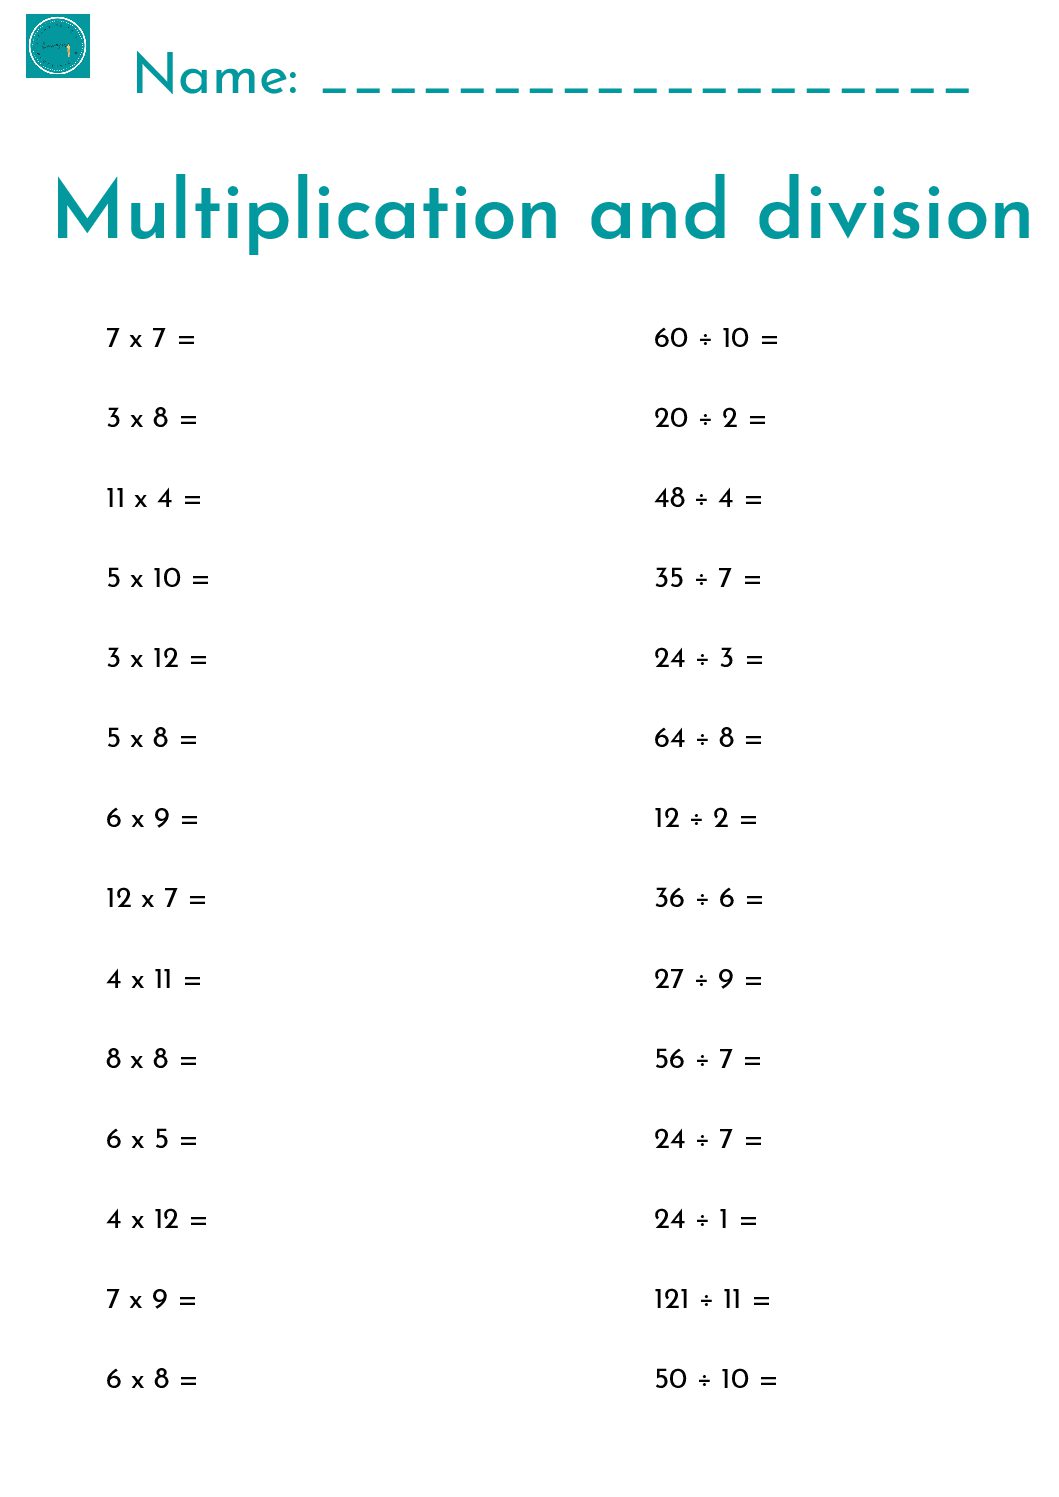 multiplying-and-dividing-with-facts-from-1-to-12-a-free